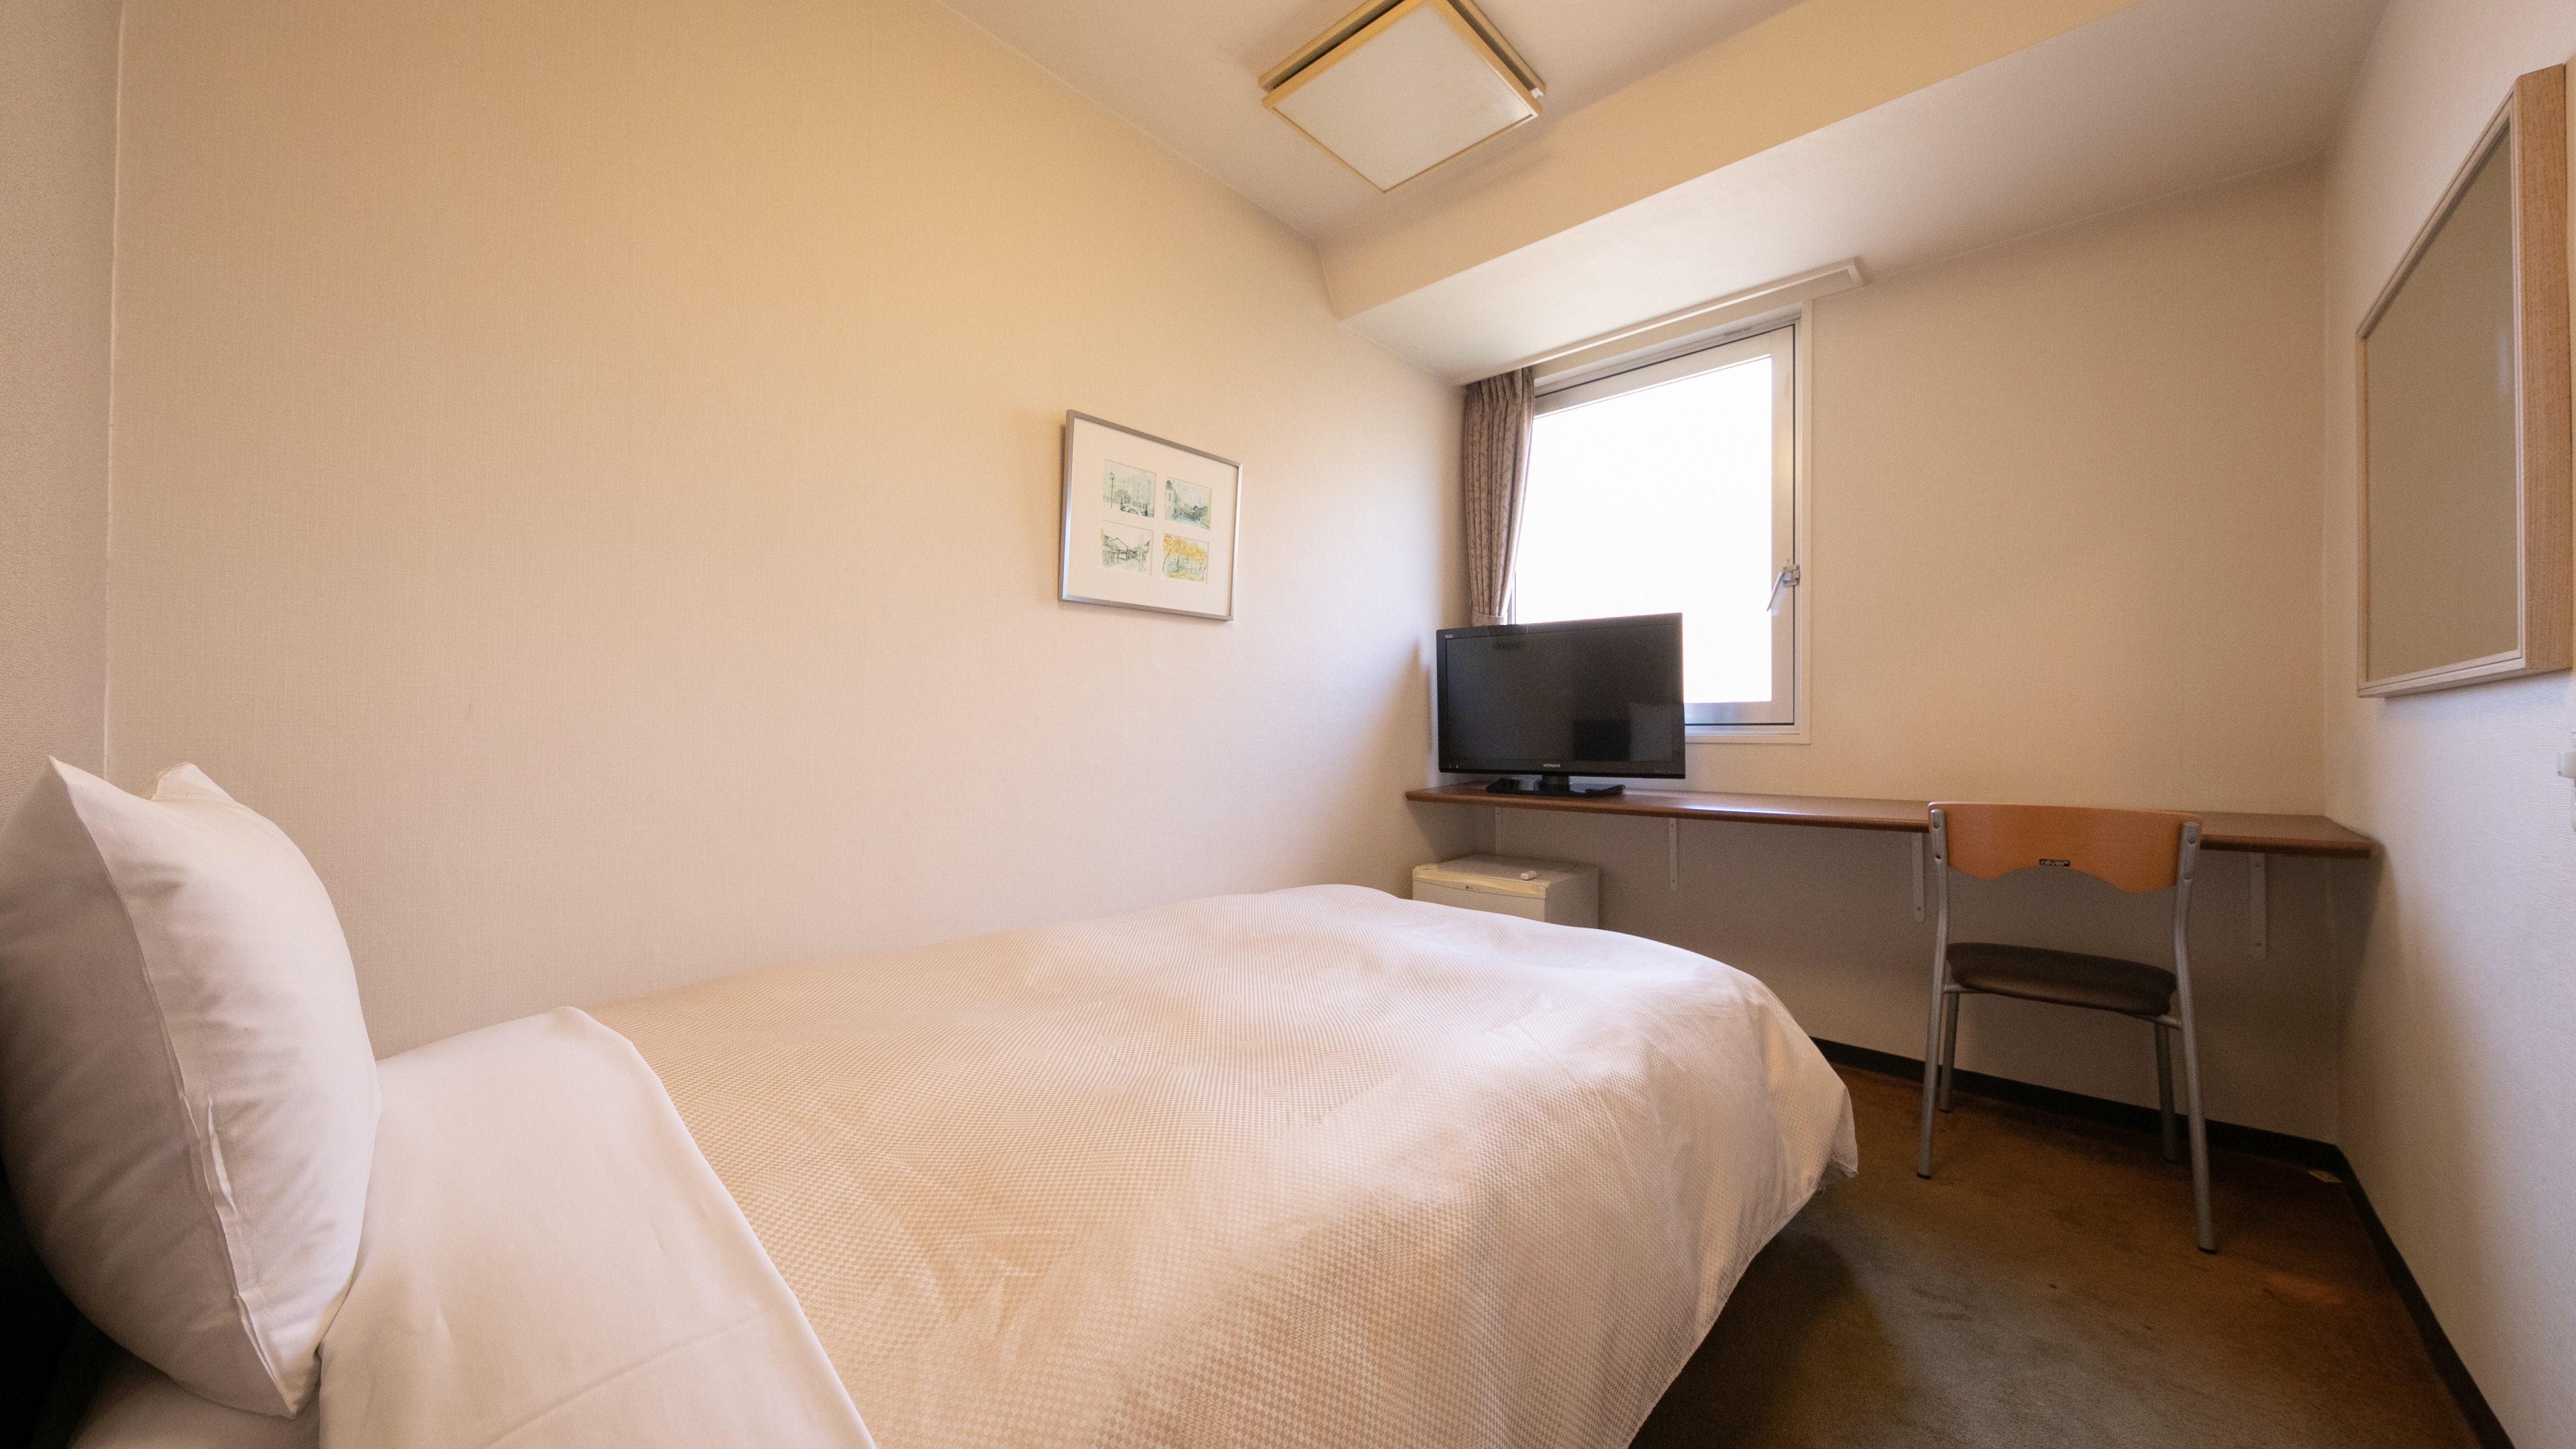 [Semi-double] A room with 12 square meters and a bed width of 120 cm. It can also be used by couples and guests with children.